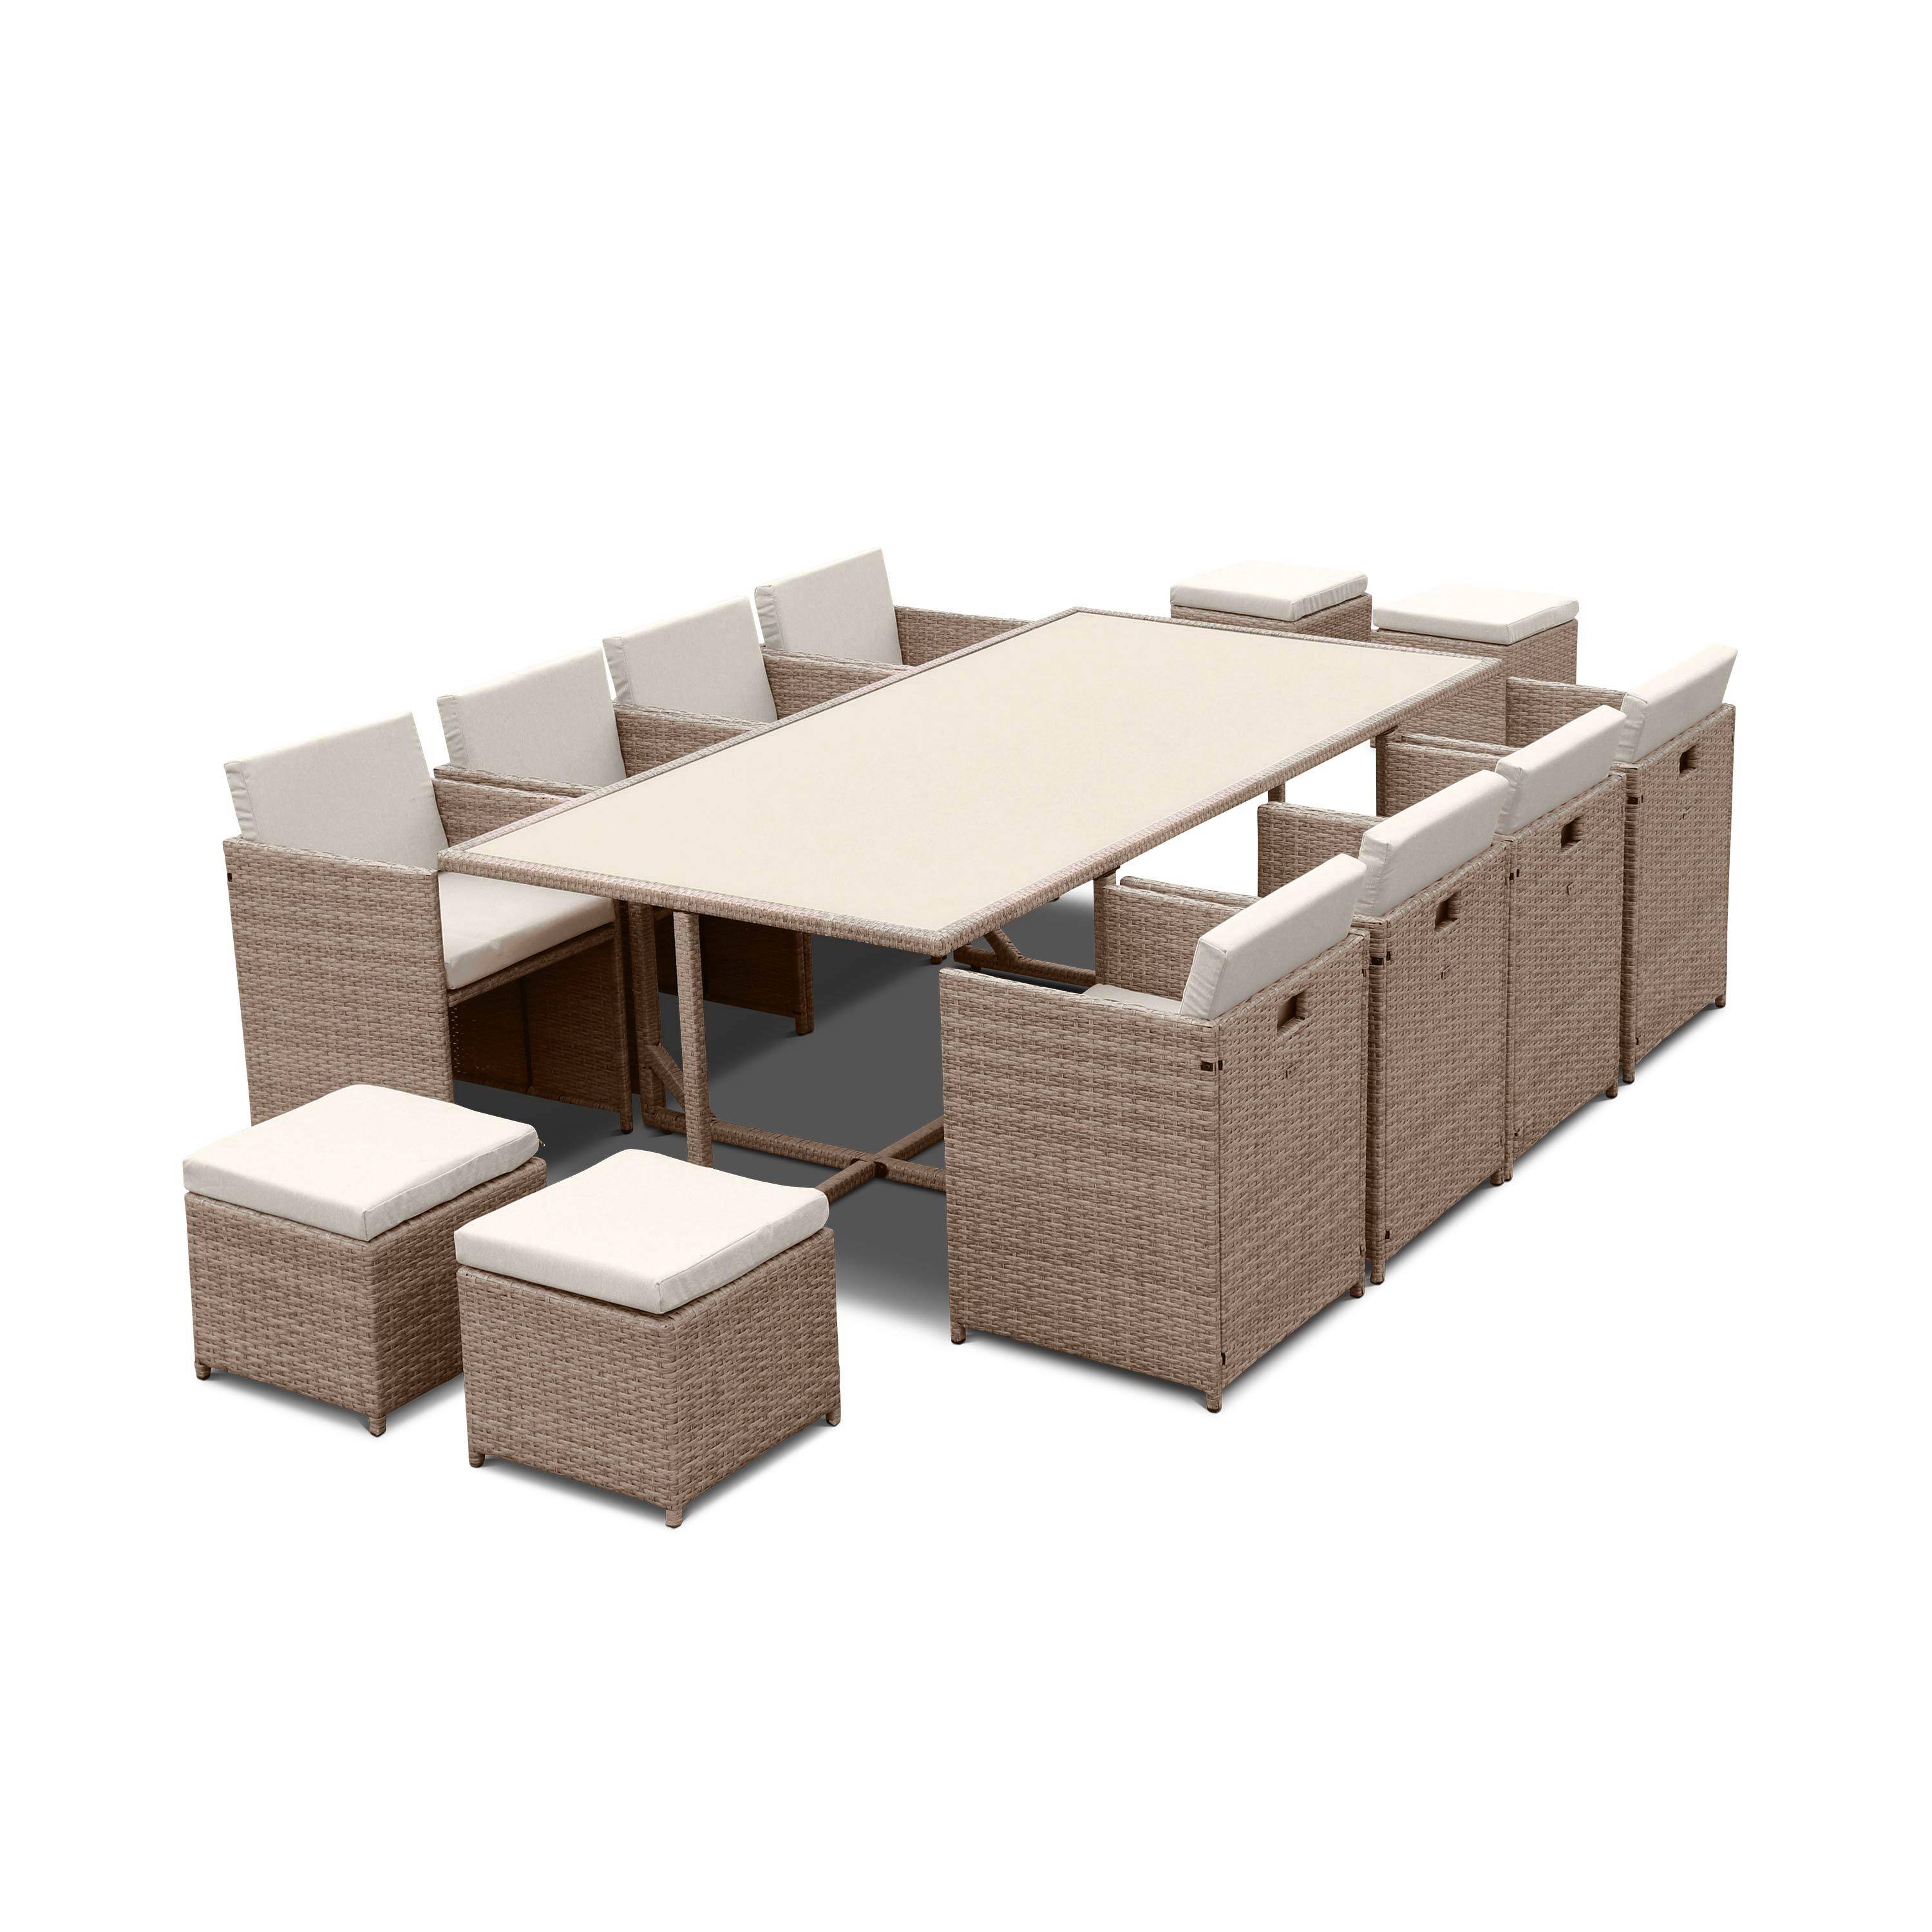 8 to 12-seater rattan cube table set - table, 8 armchairs, 4 footstools - Vabo 12 - Natural rattan, Beige cushions Photo2